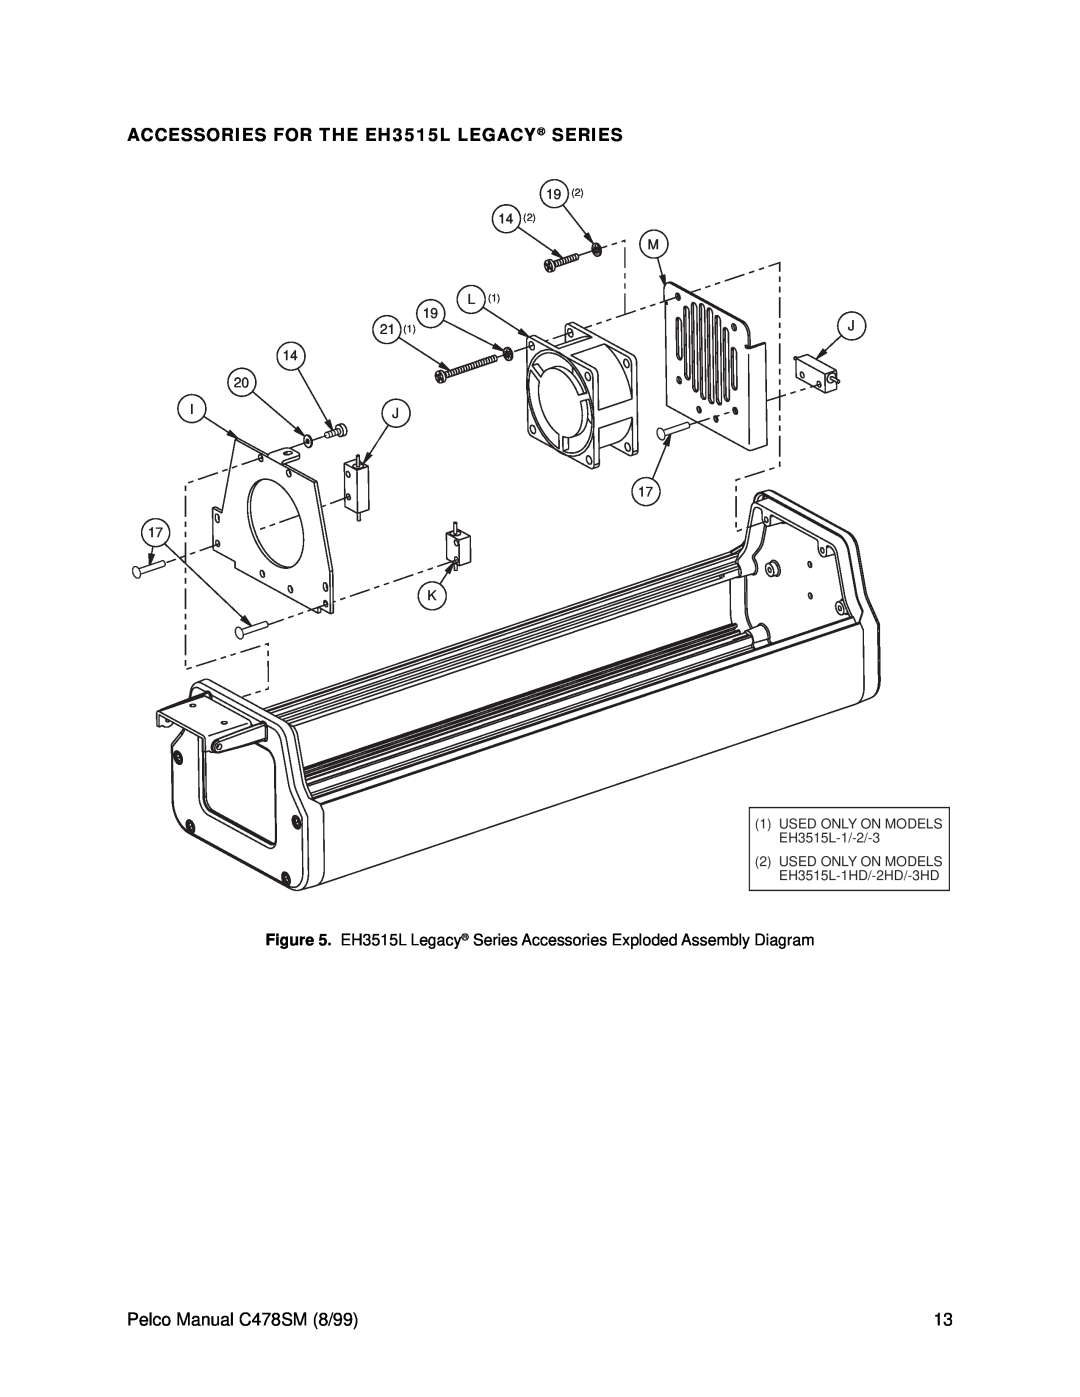 Pelco EH3500 service manual ACCESSORIES FOR THE EH3515L LEGACY SERIES, Pelco Manual C478SM 8/99 